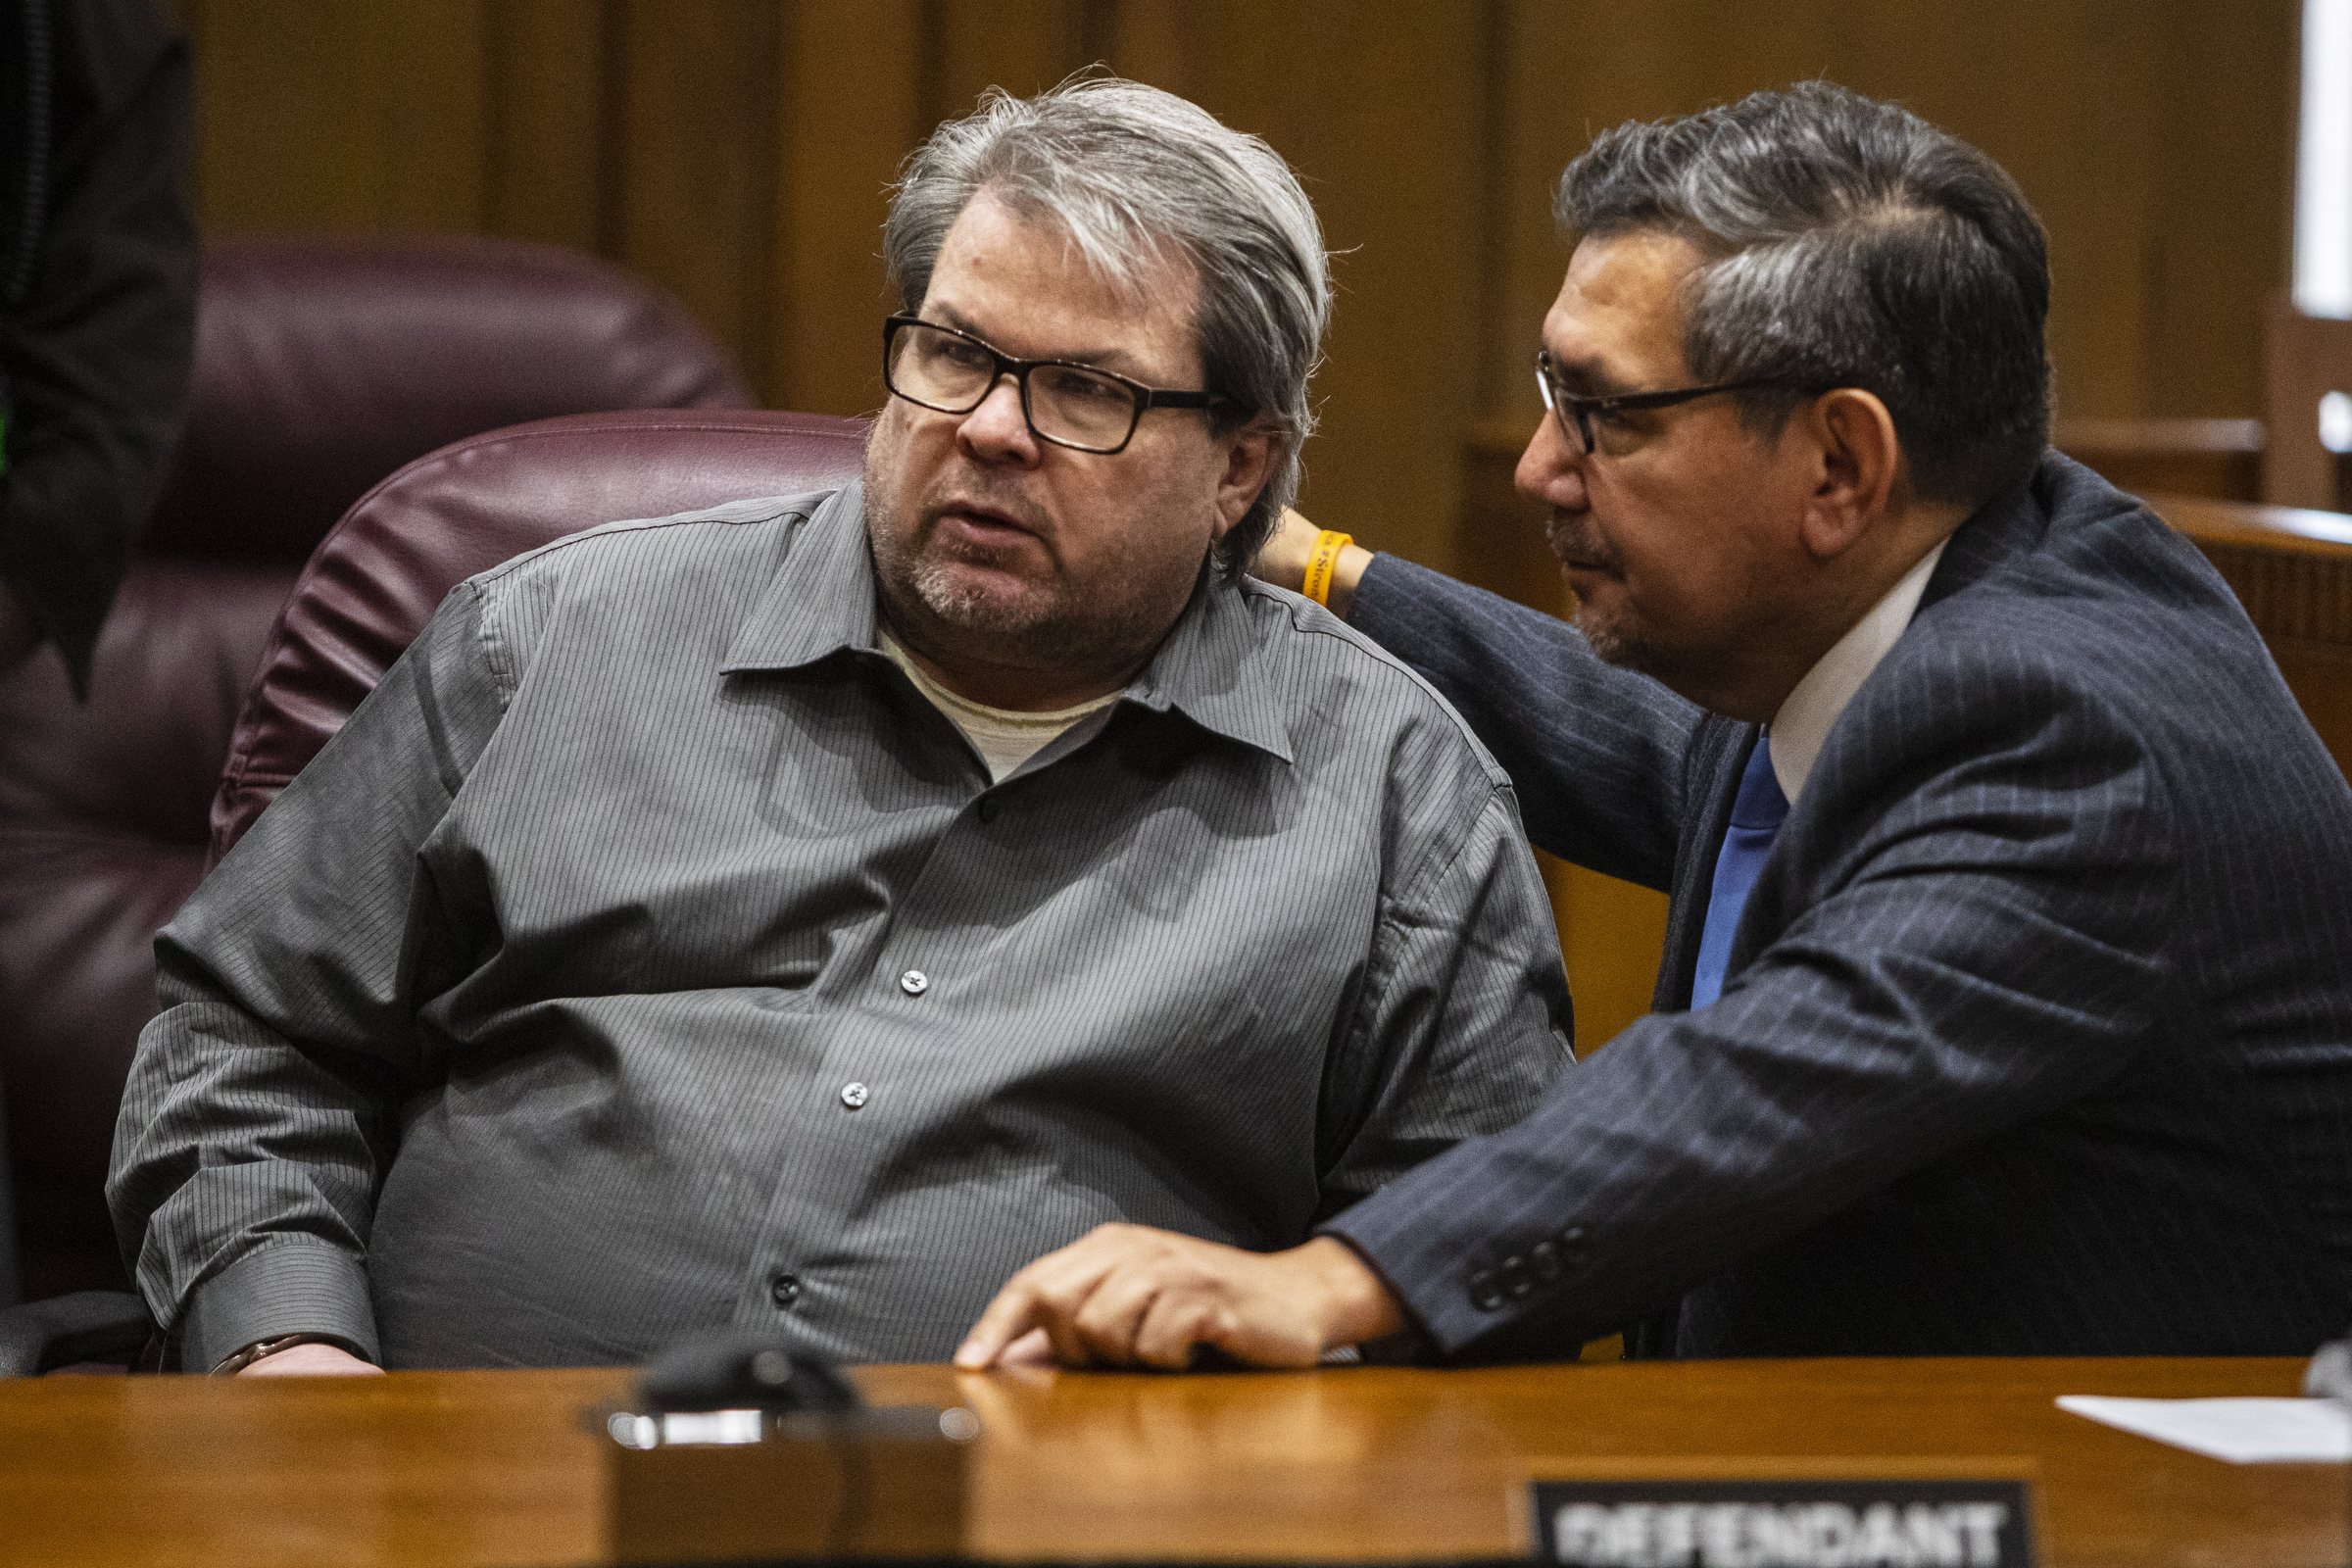 PHOTO: Jason Dalton talks with his defense attorney Eusebio Solis moments before pleading guilty to six counts of murder and several other charges at the Kalamazoo County Courthouse on Monday, Jan. 7, 2019 in Kalamazoo, Mich.